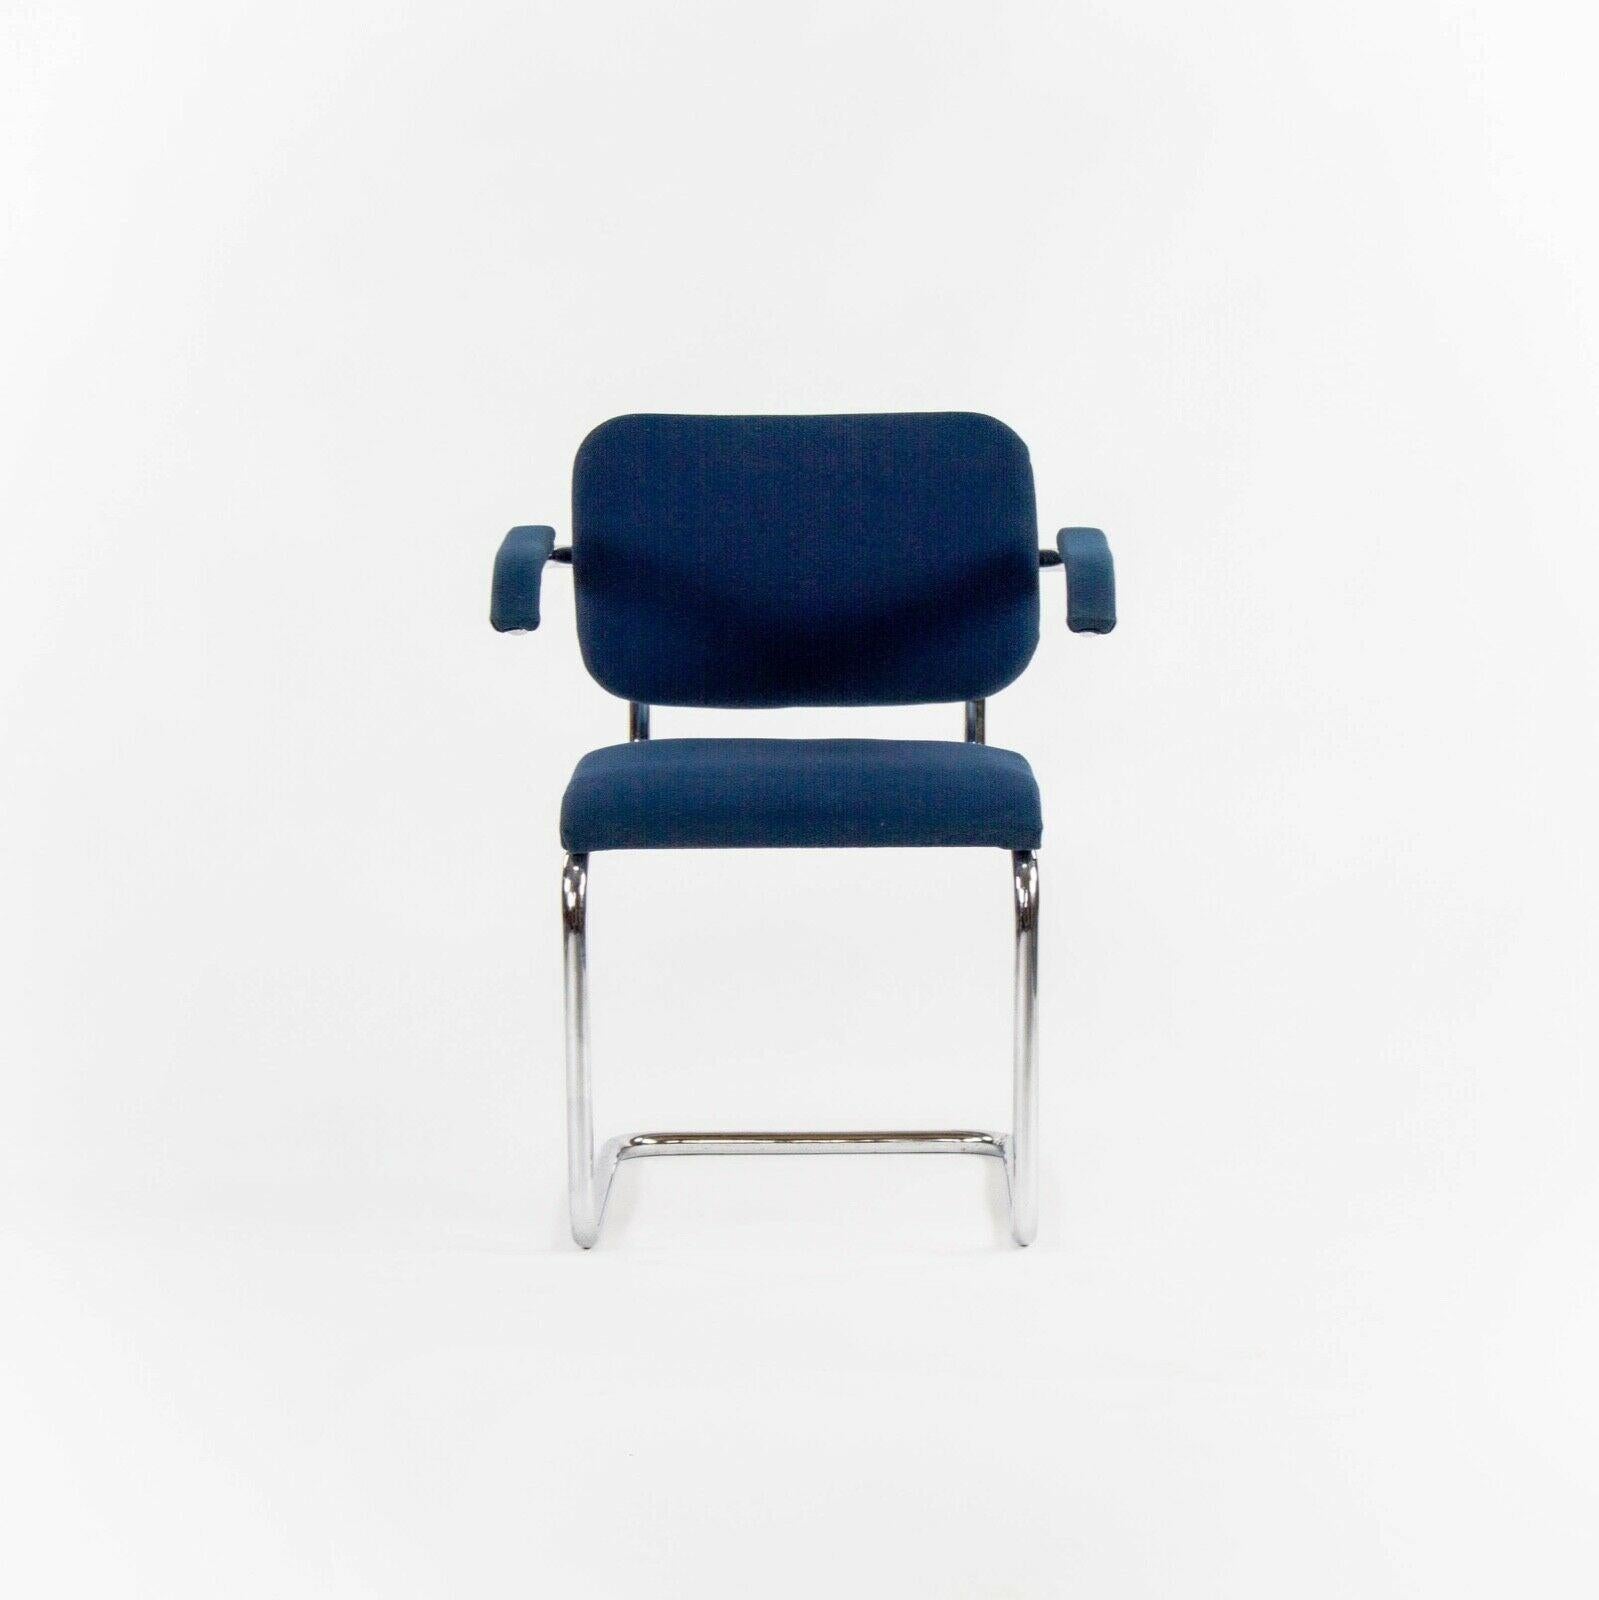 Listed for sale is a pair of 1970s vintage Cesca armchairs upholstered in blue fabric, produced by Knoll and designed by Marcel Breuer. The Cesca chair is an iconic Breuer design. These came from an estate near the Knoll factory in Pennsylvania. The